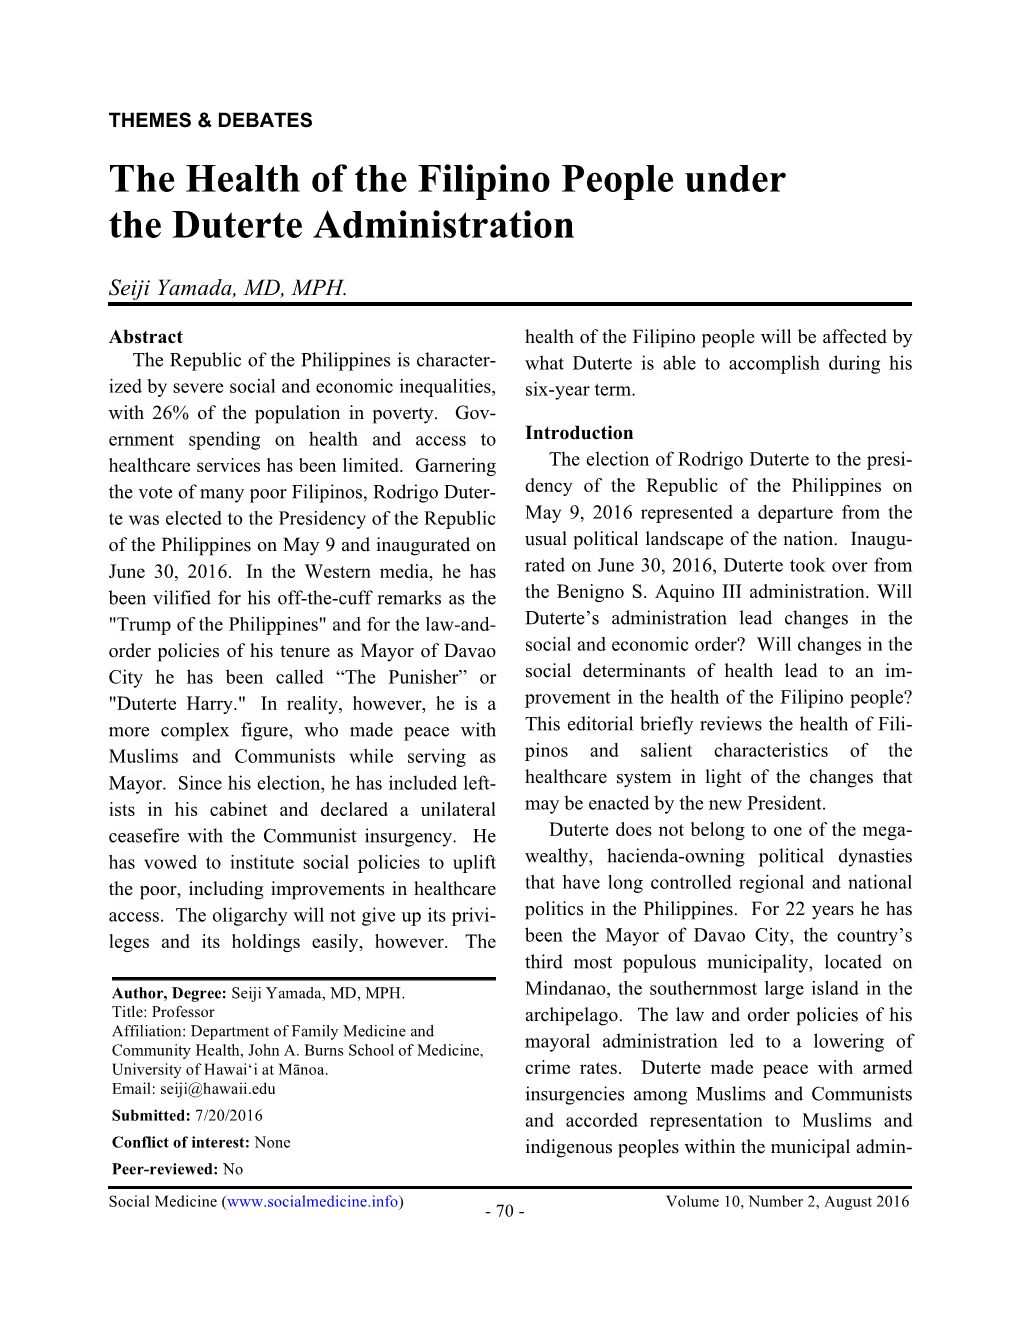 The Health of the Filipino People Under the Duterte Administration